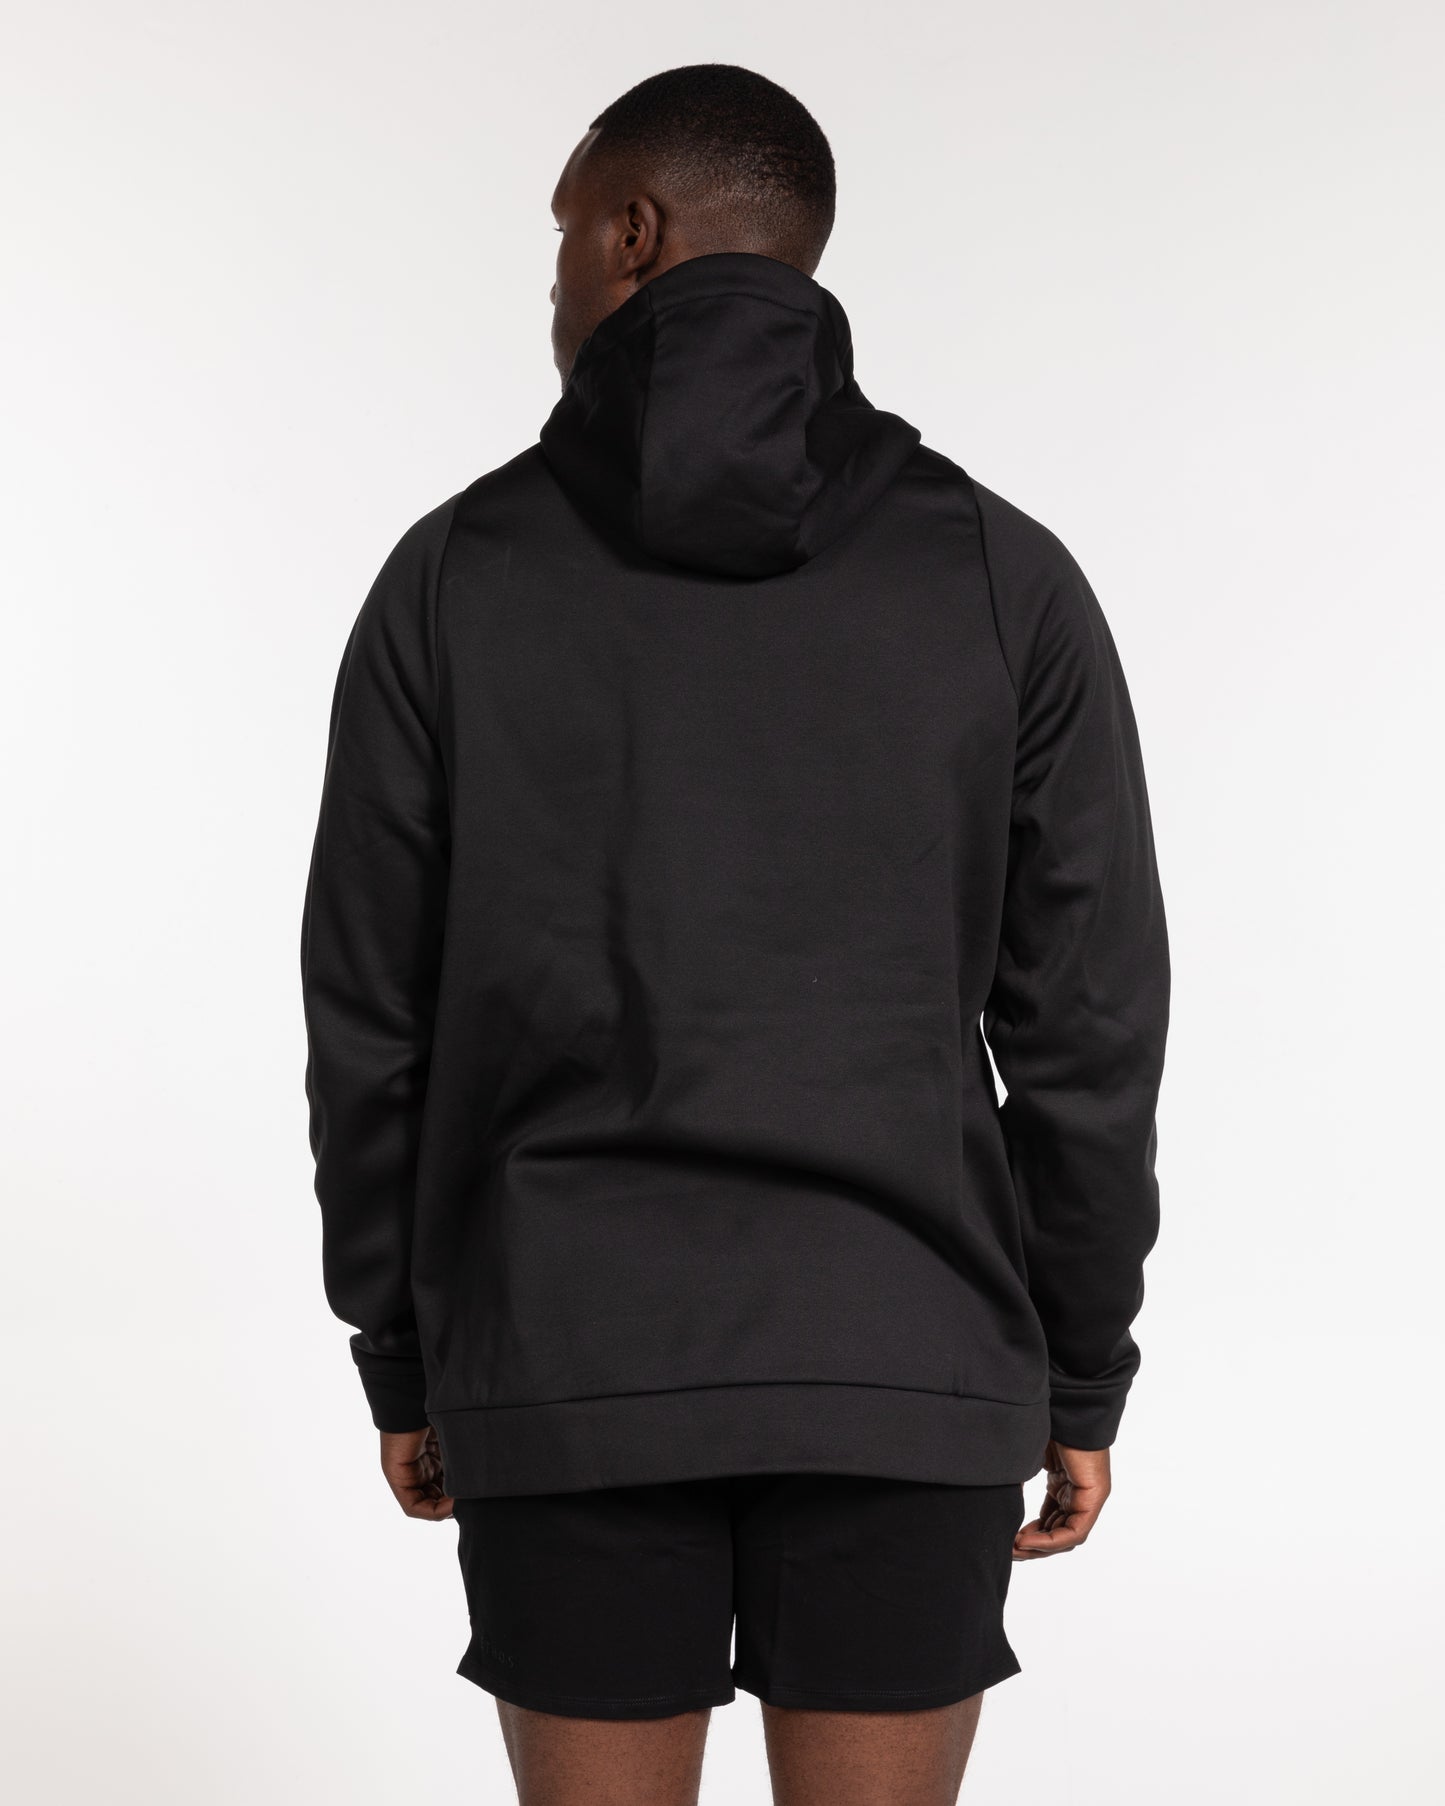 Activ8 NIKE THERMA Pullover Hoodie